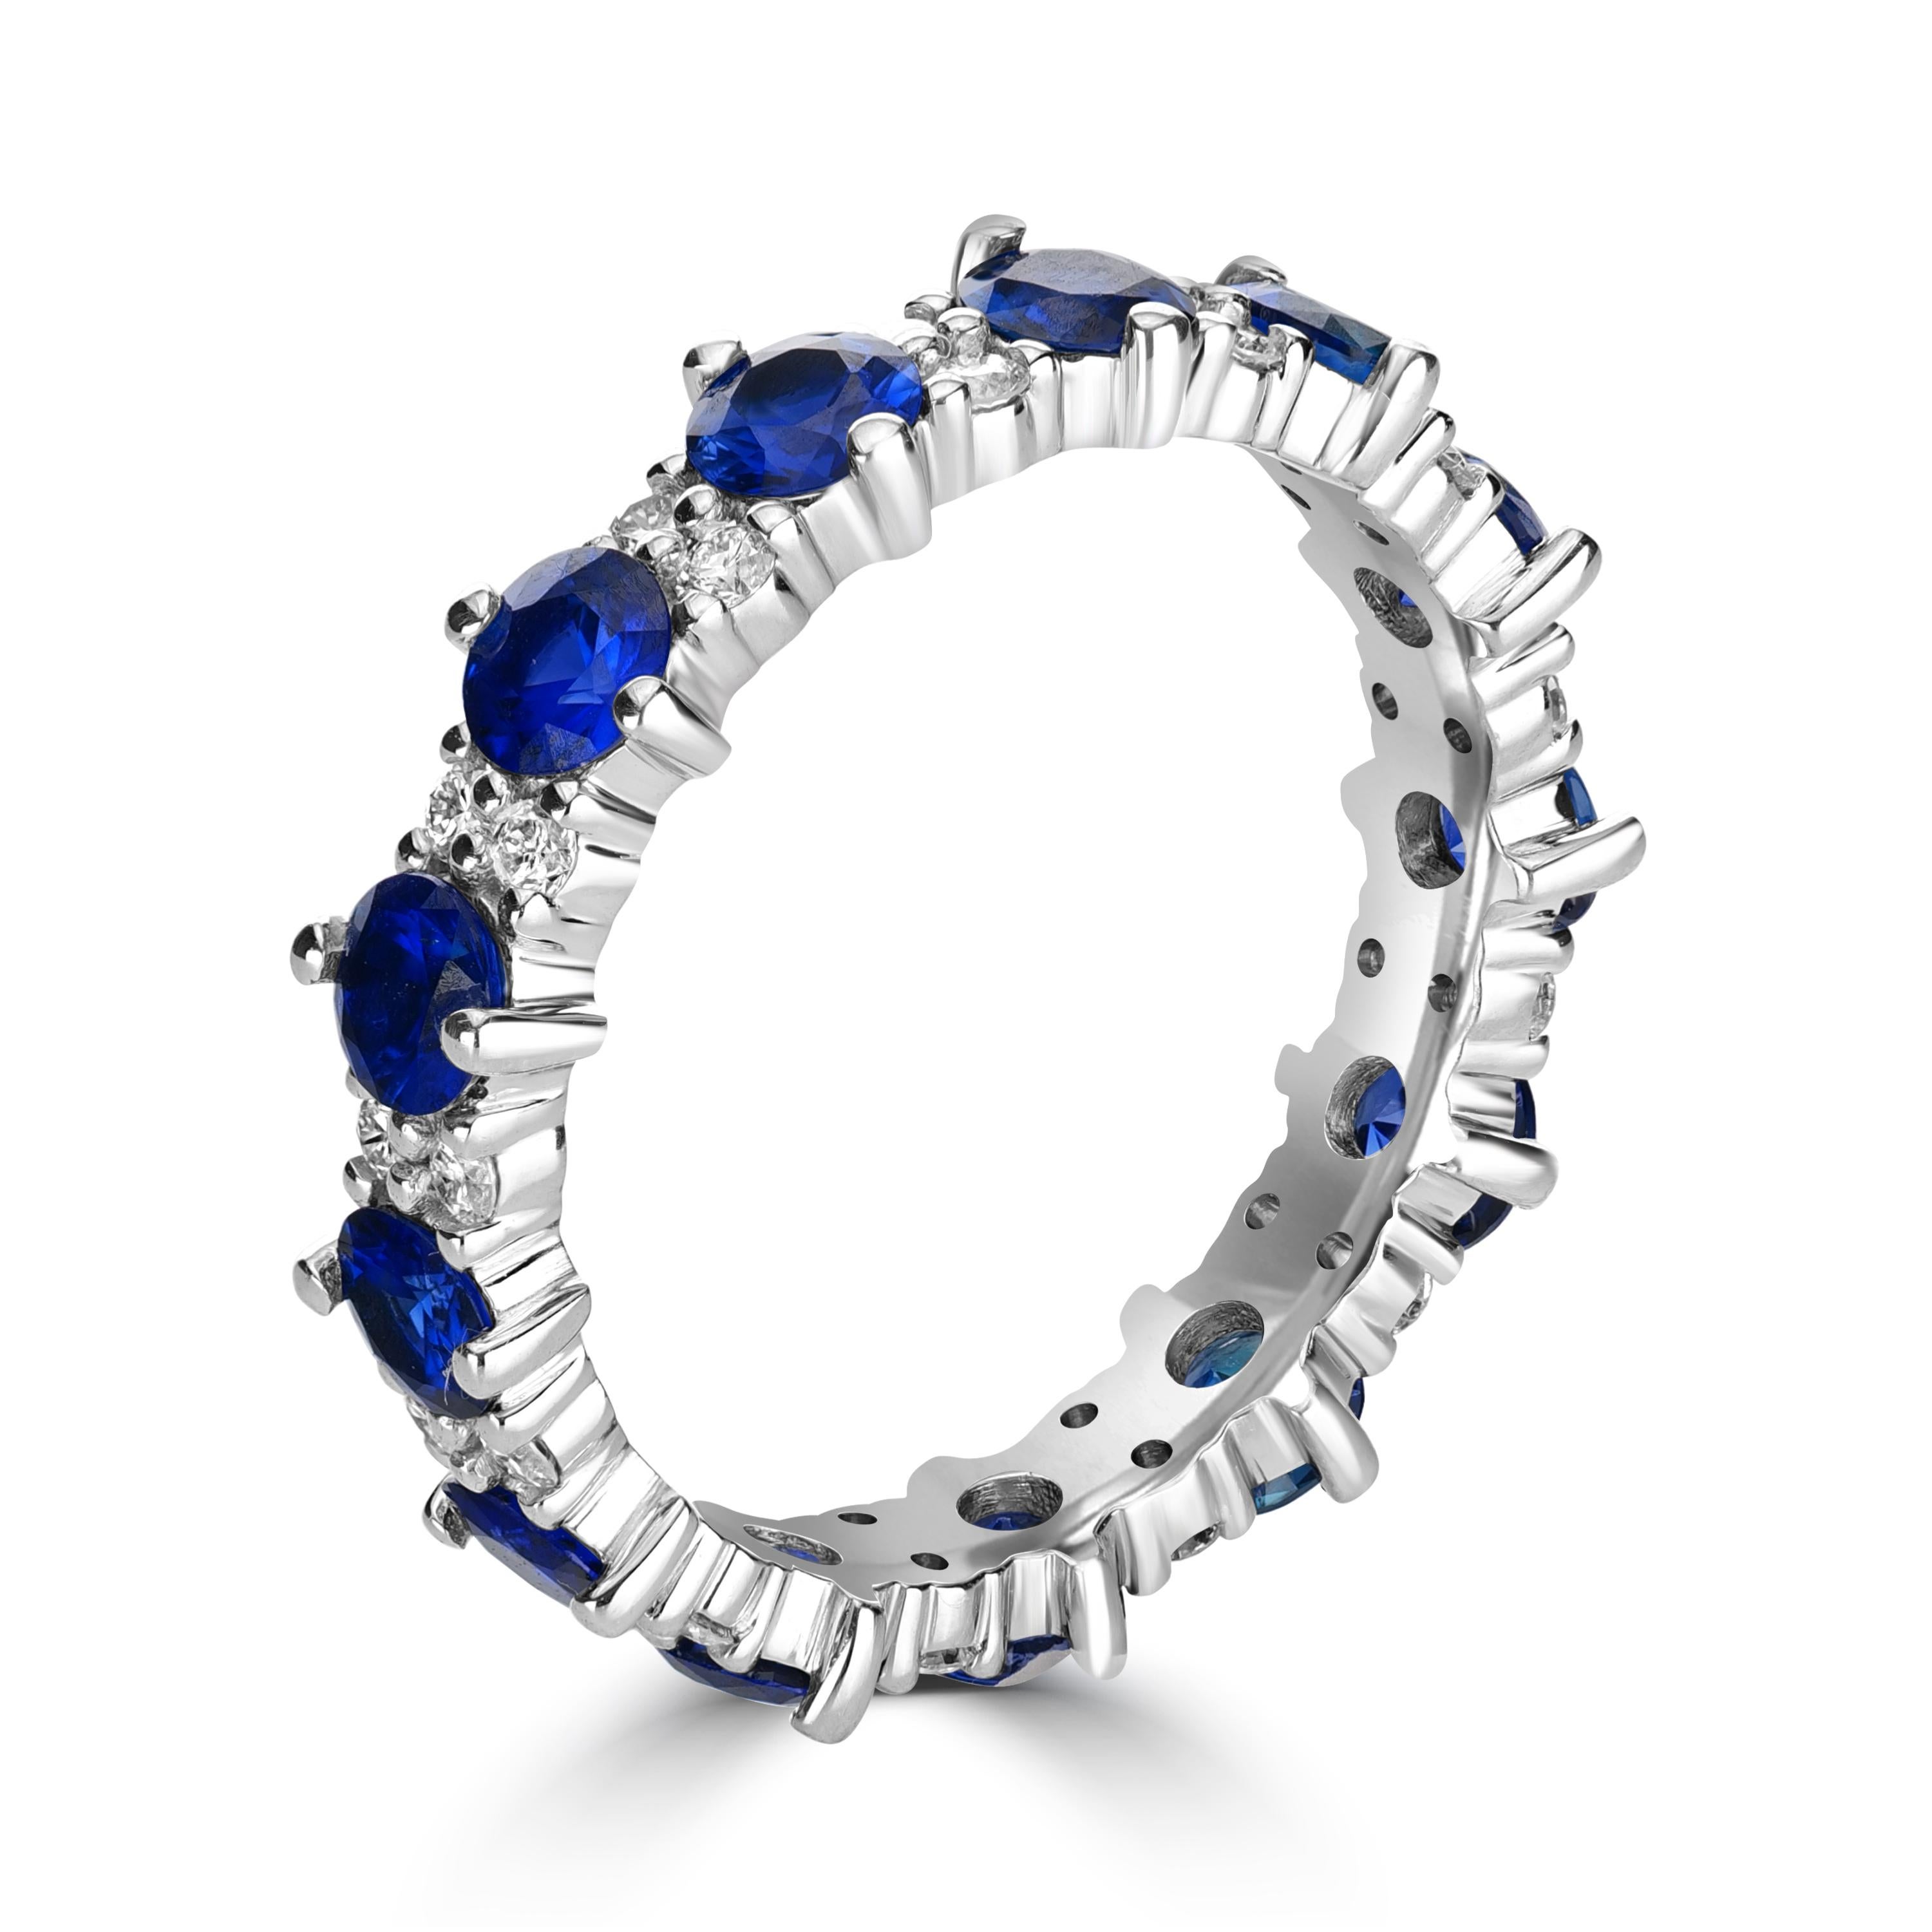 This eternity band is like no other. This 2.37 carats of sapphire and diamond eternity ring consist of round cut sapphires and round cut diamonds. The sapphires used are from Sri Lanka also known as Ceylon sapphires known for their bright blue color